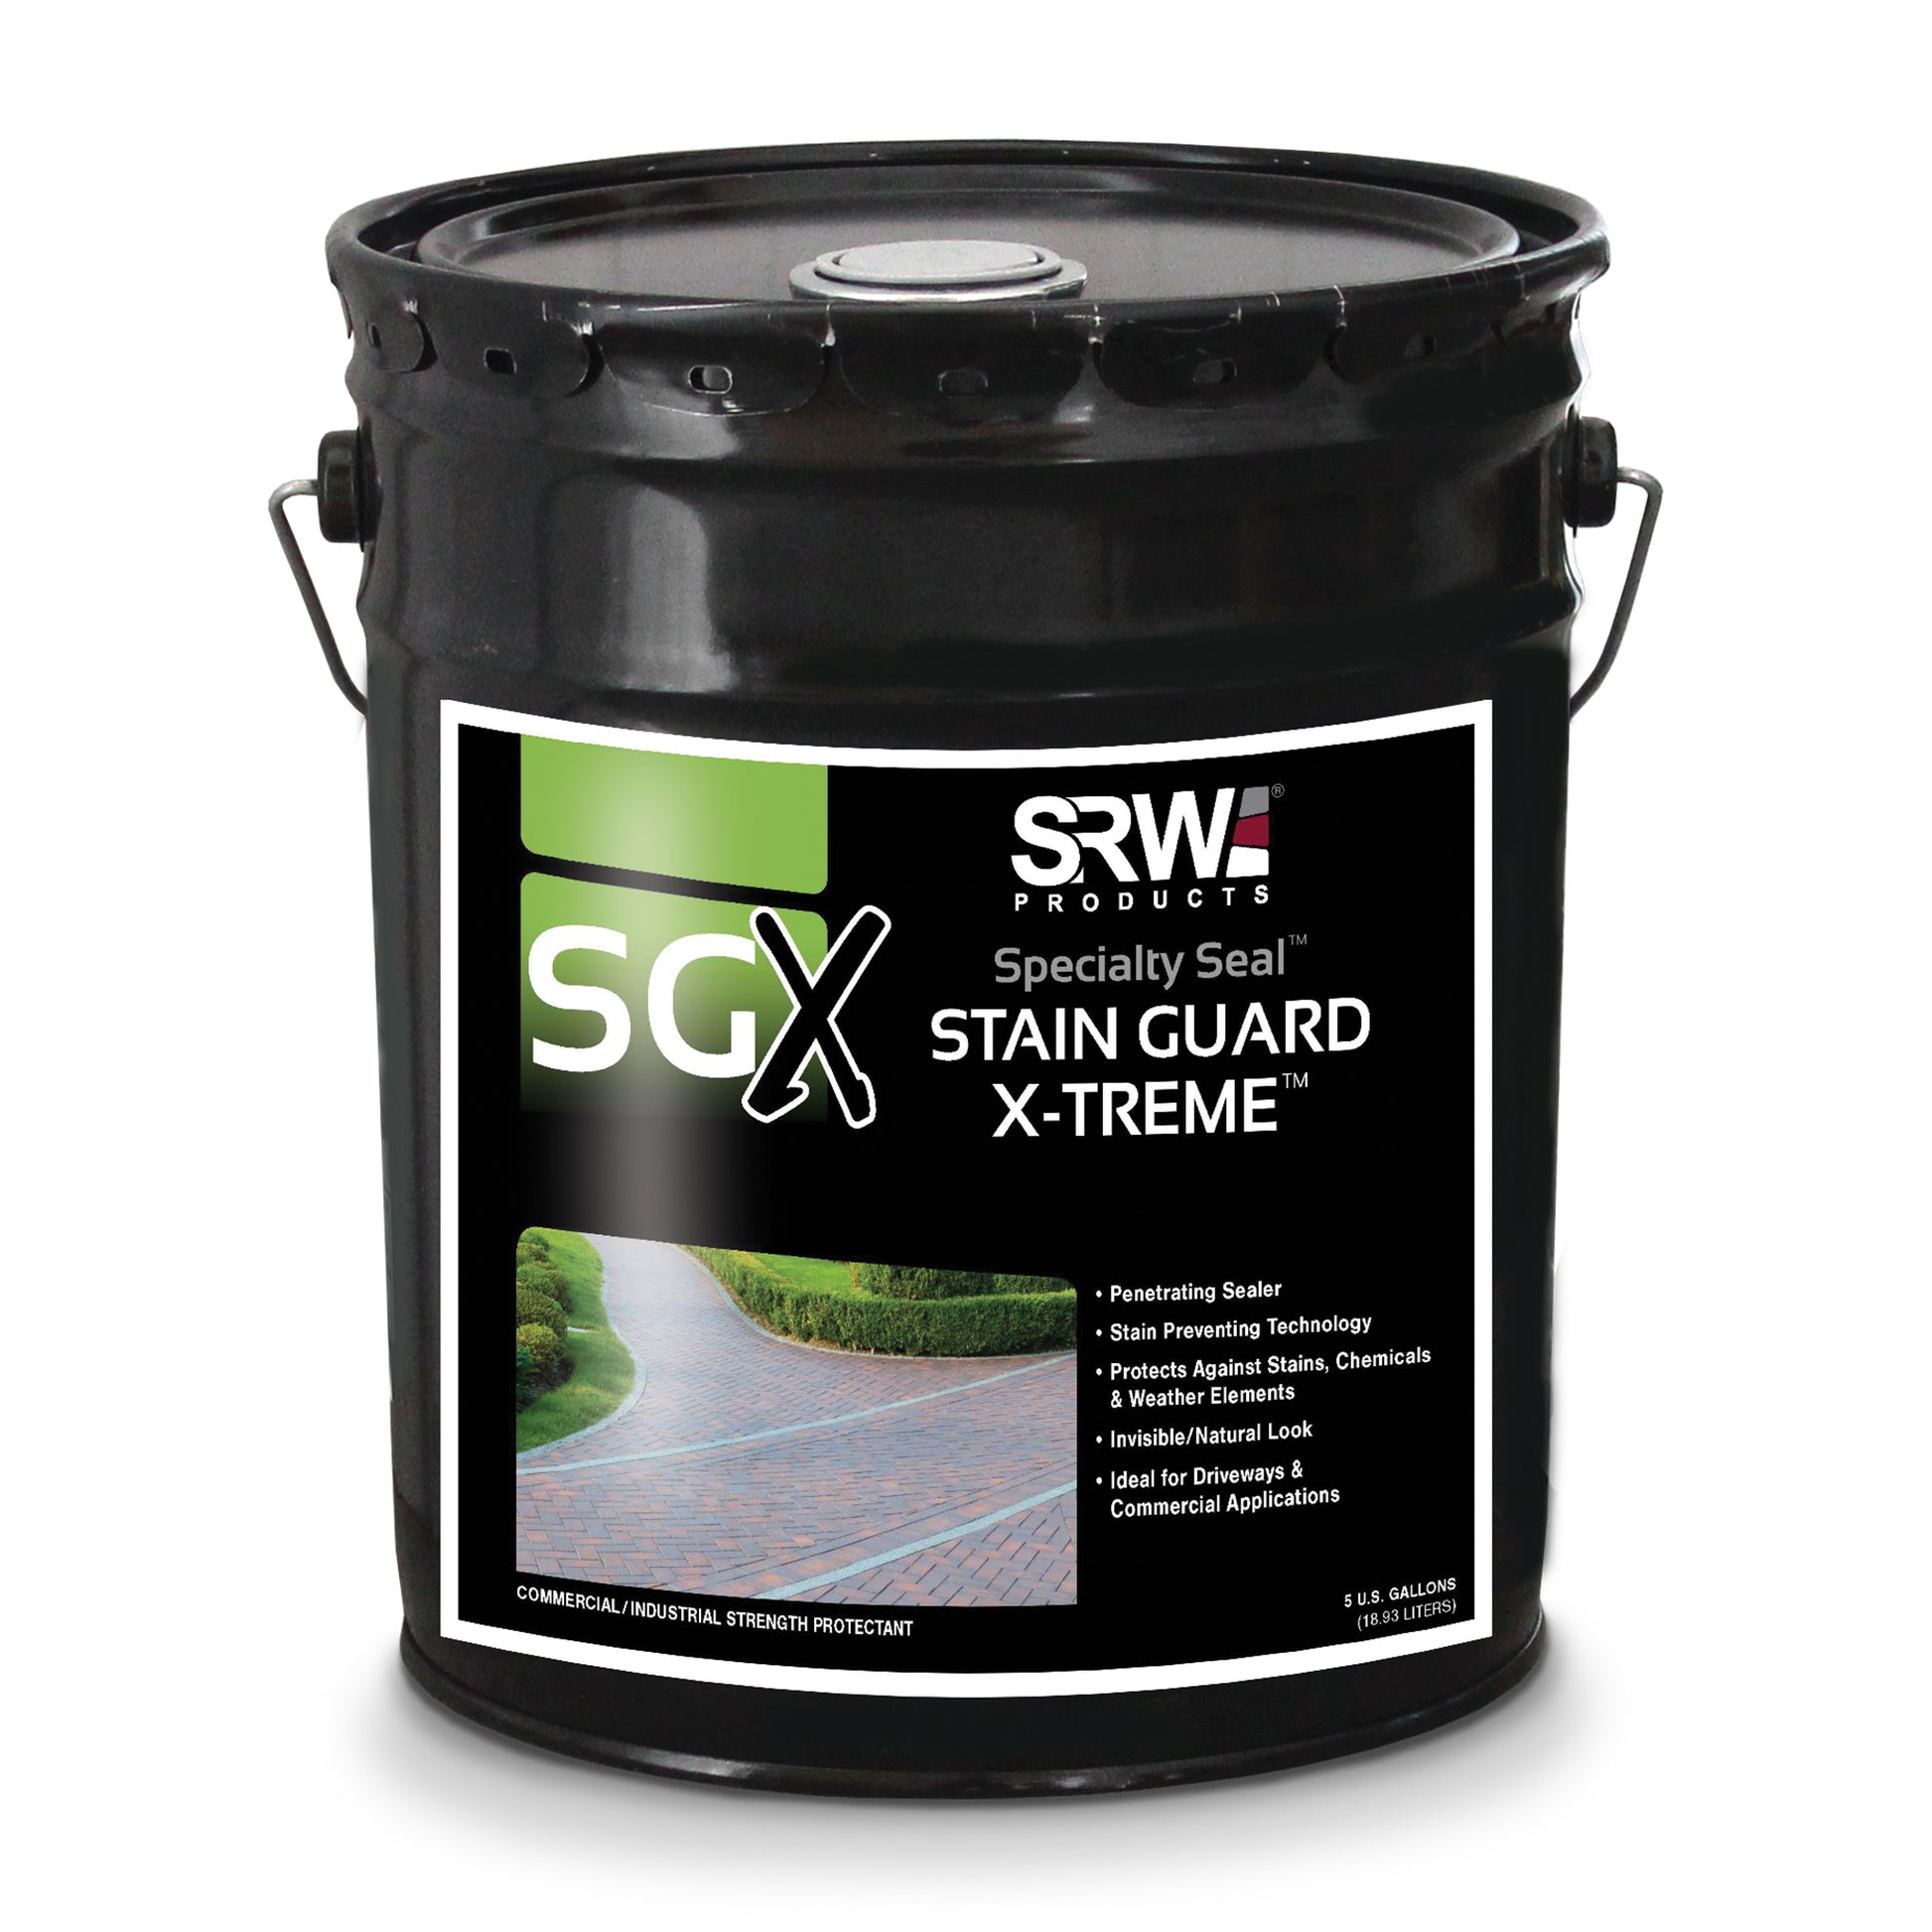 SRW Products SGX Stain Guard X-treme™ Specialty Seal™ bucket